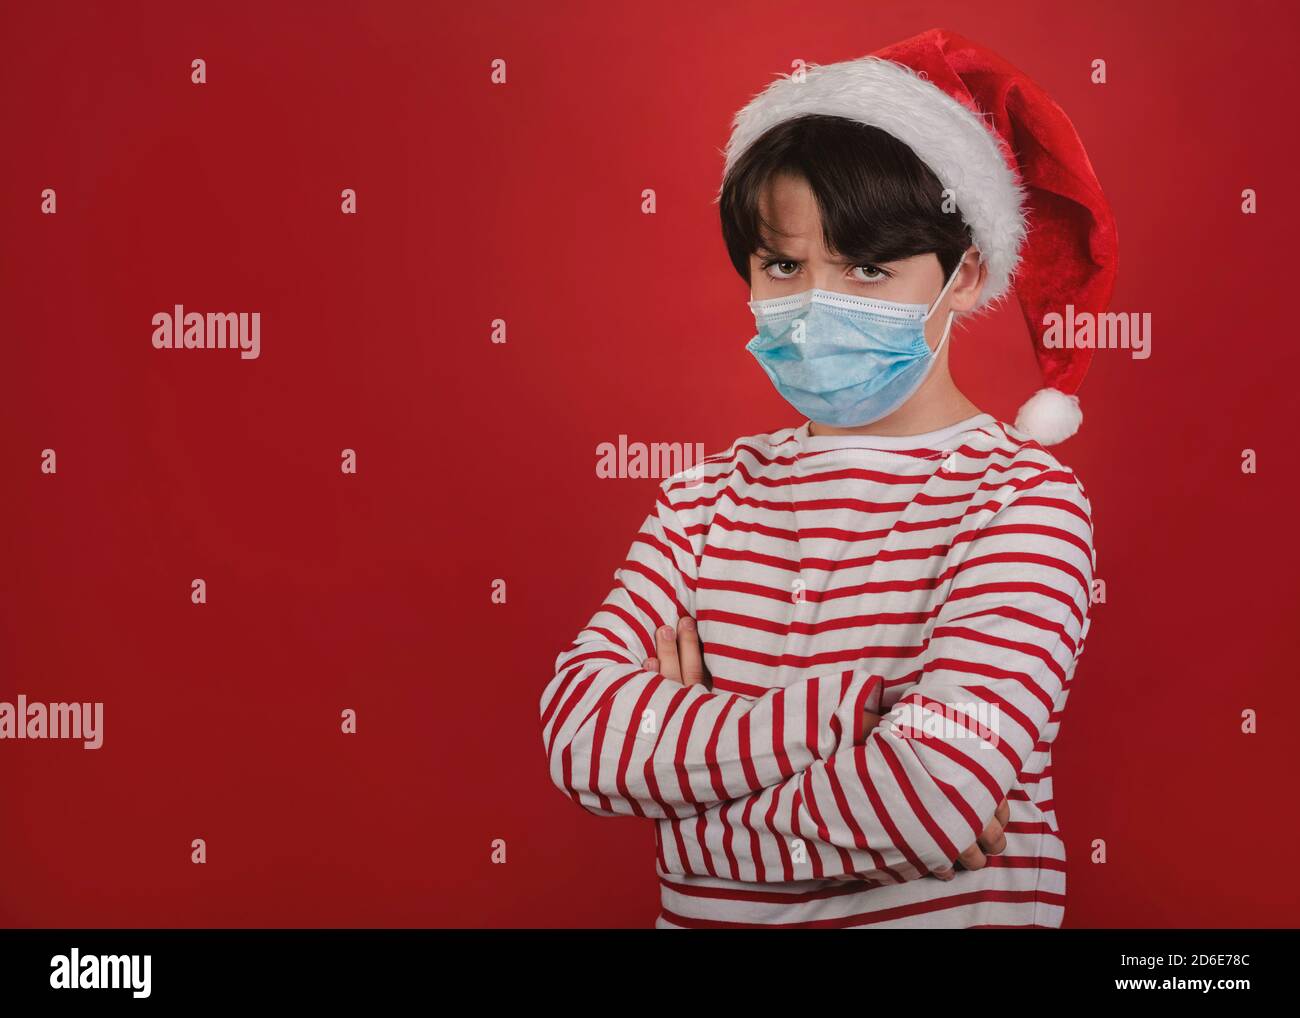 angry kid with medical mask wearing Santa Claus Hat over red background Stock Photo